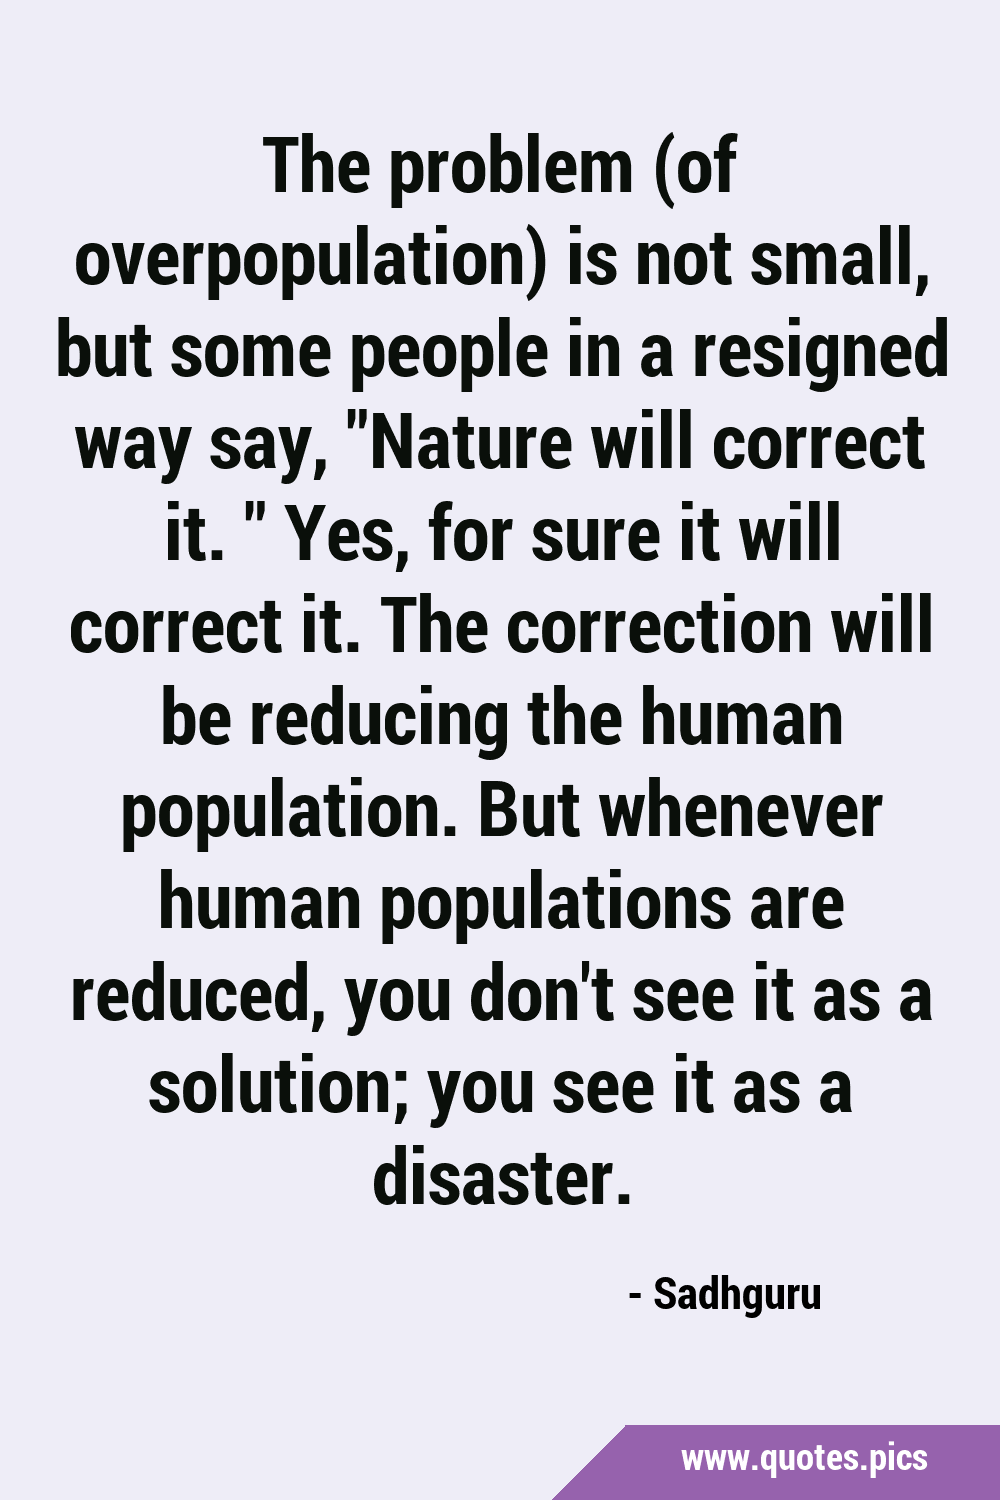 human overpopulation quotes